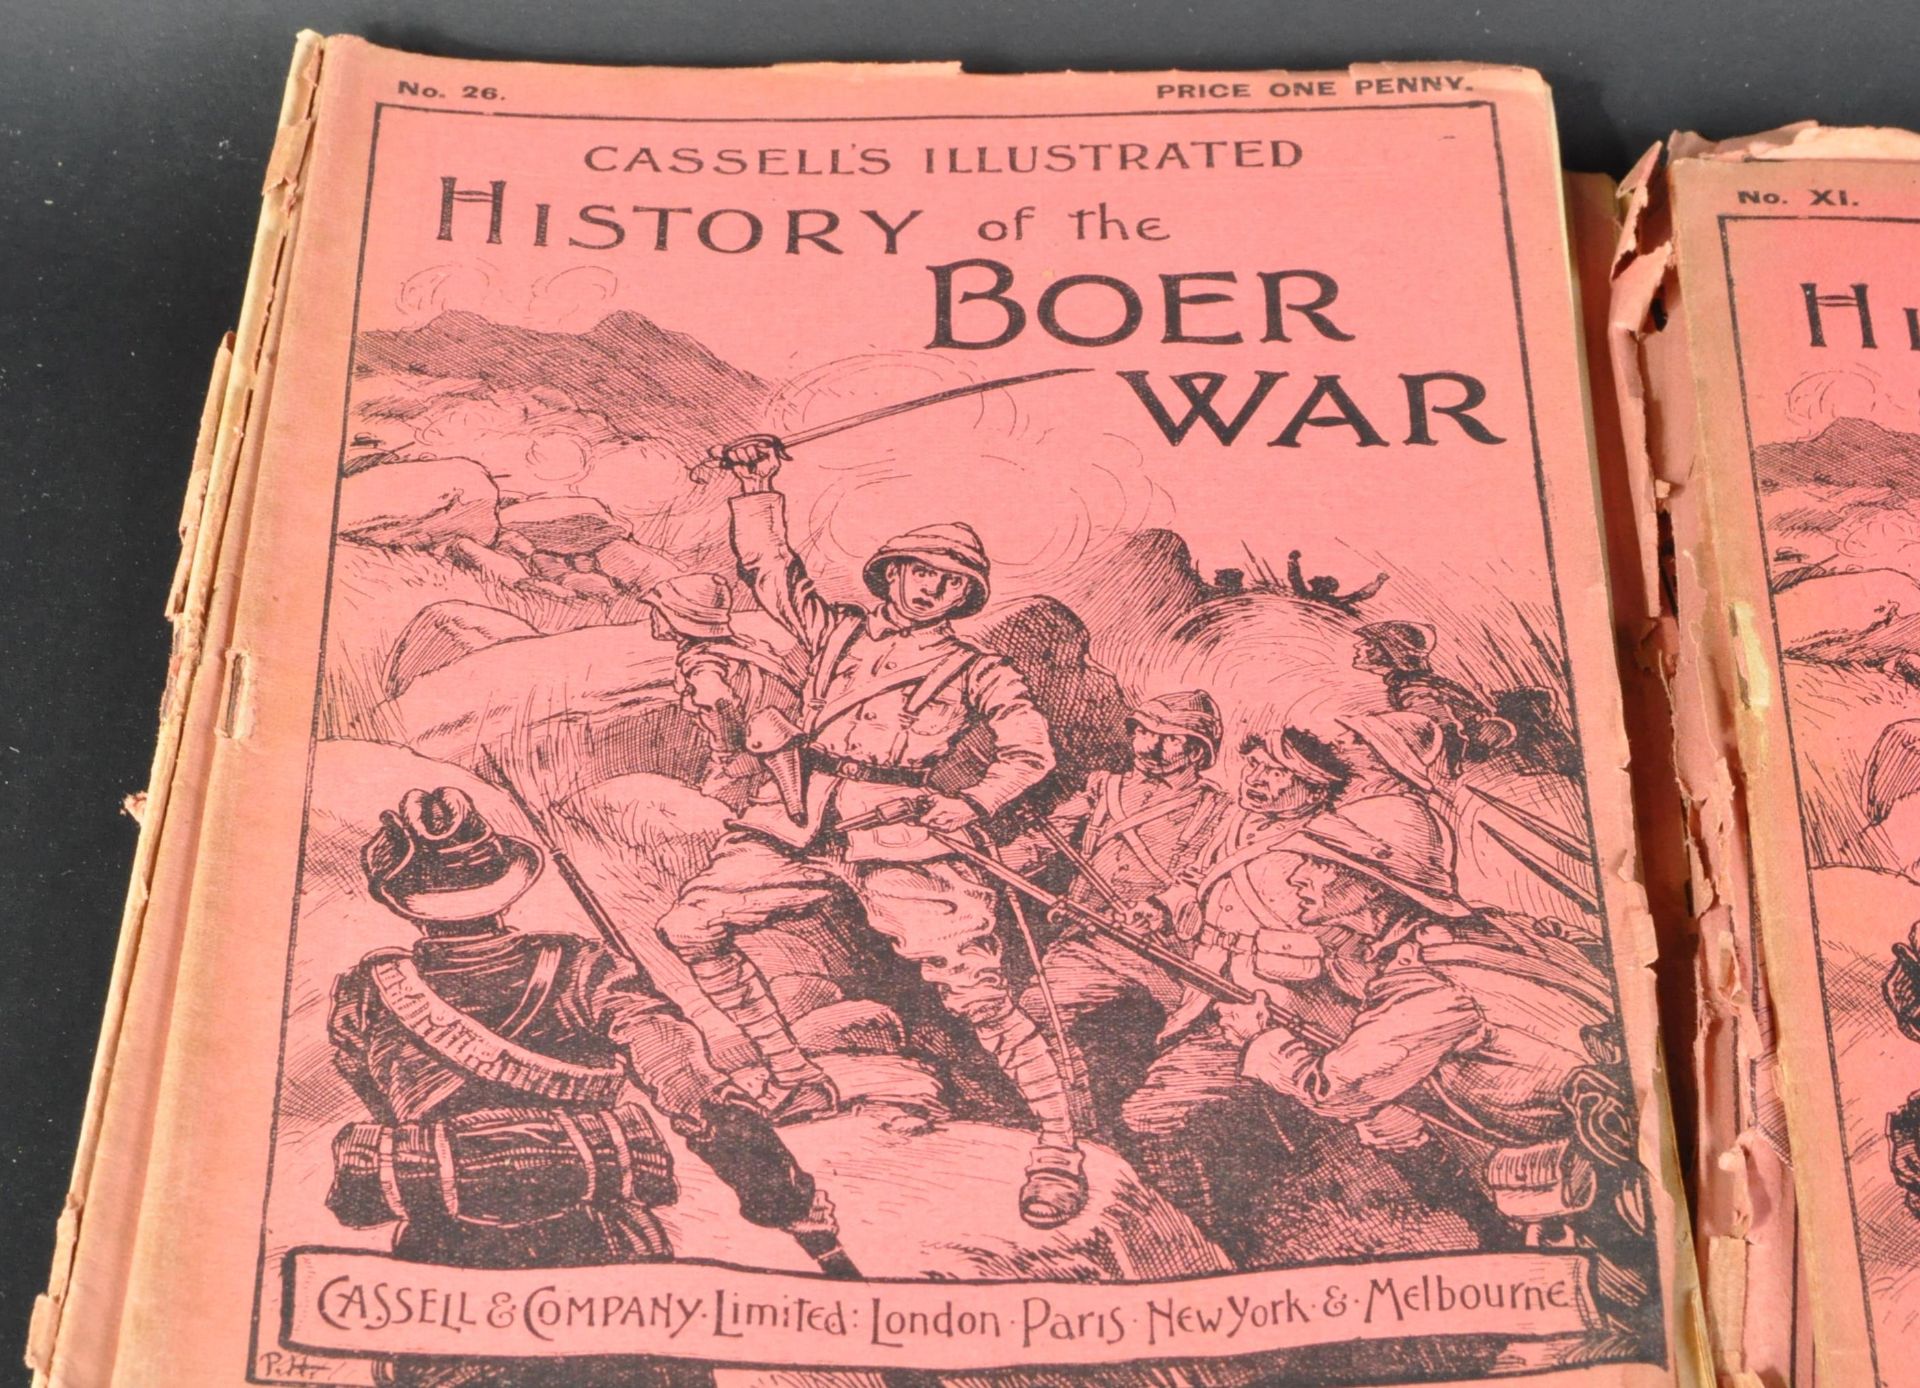 BOER WAR - COLLECTION OF CASSELL'S ILLUSTRATED HISTORY MAGAZINES - Image 4 of 9